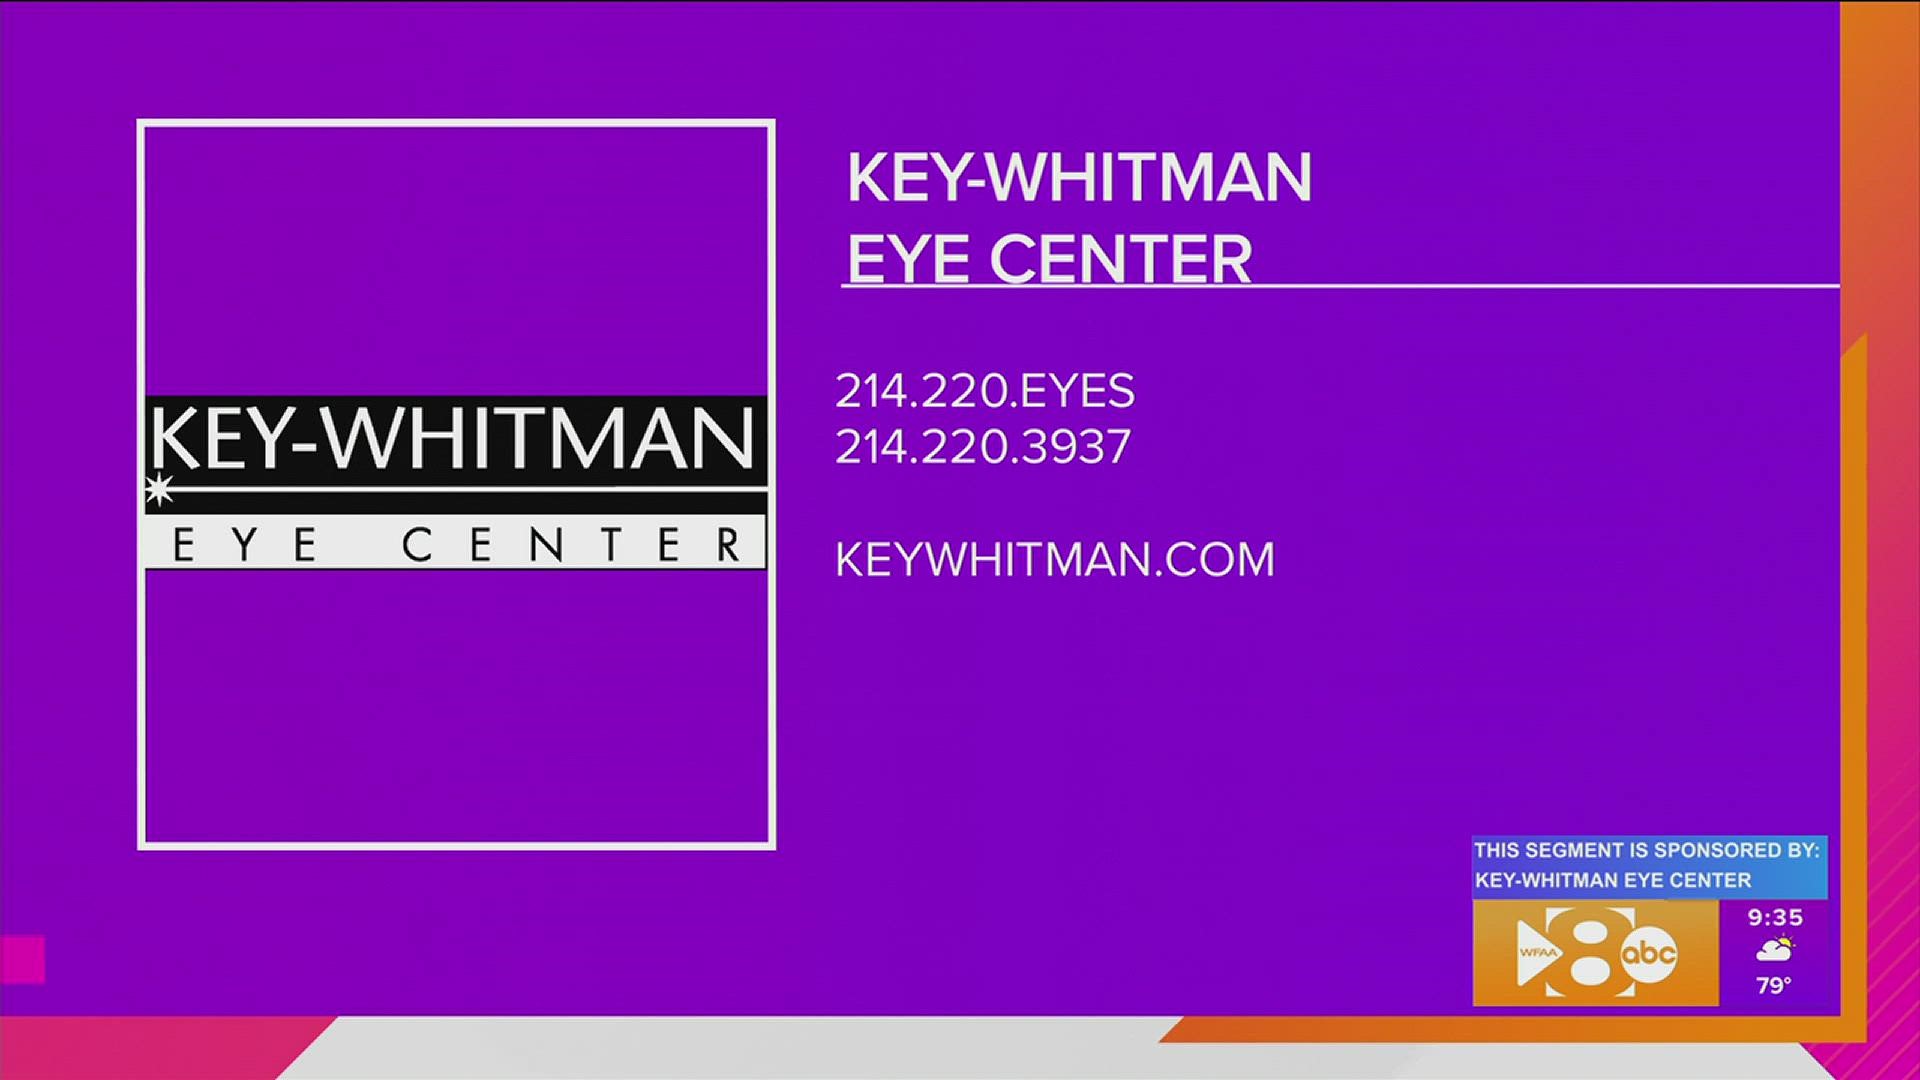 This segment sponsored by: Key Whitman. Call them at 214.220.3937 or check their website keywhitman.com for more information about their services.